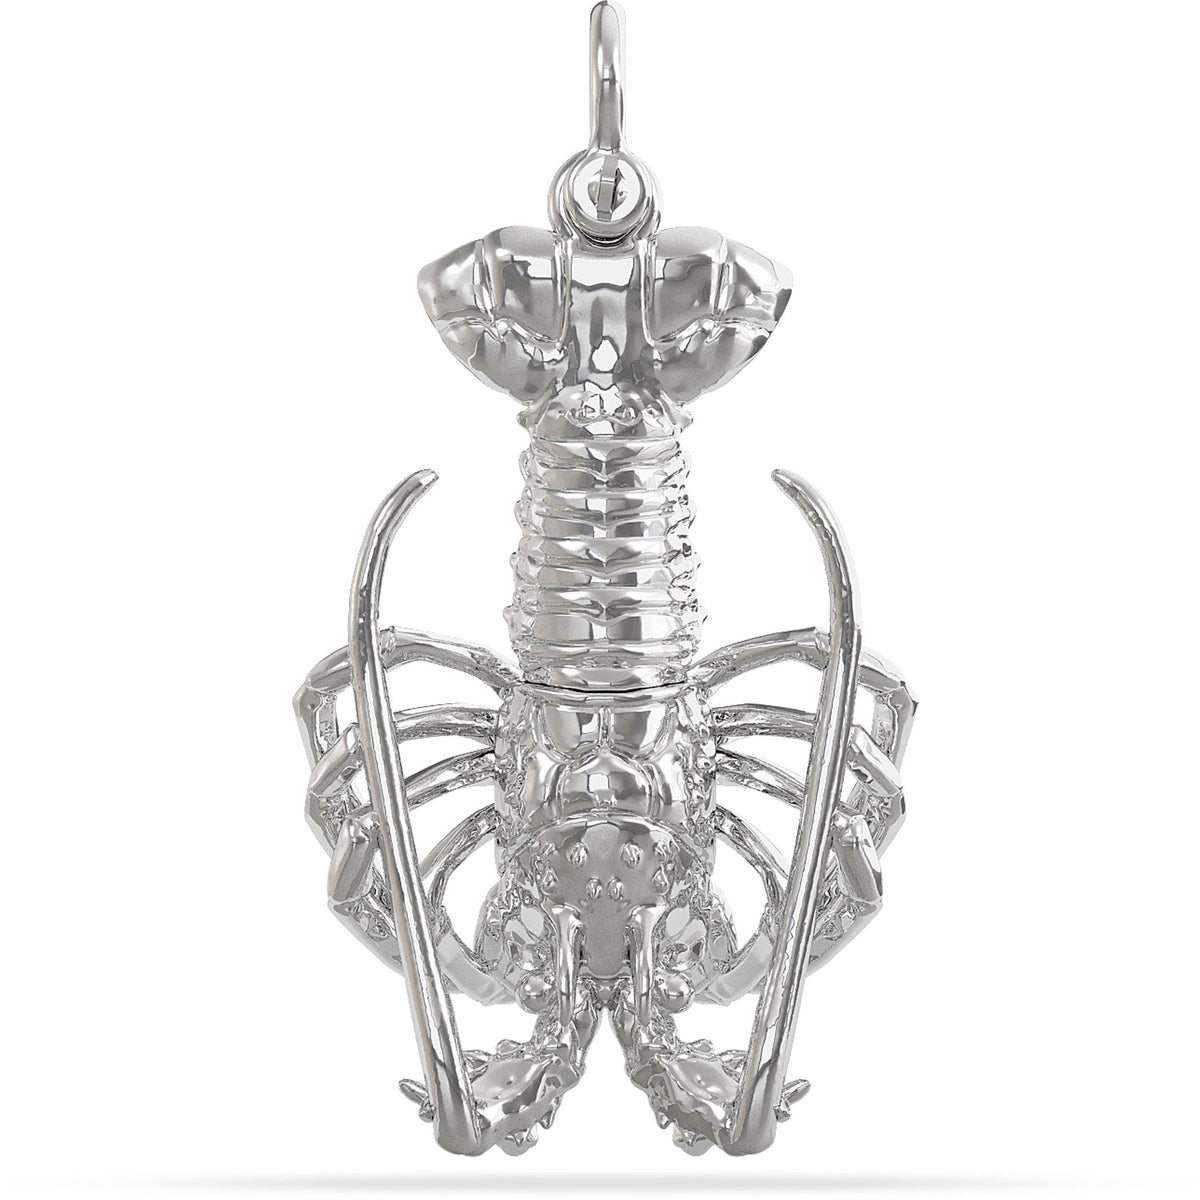 Sterling Silver Spiny Florida Lobster Pendant High Polished Mirror Finish Tail Hung on A Mariner Shackle Bail Custom Designed By Nautical Treasure Jewelry In The Florida Keys Islamorada for 2022 Mini Season